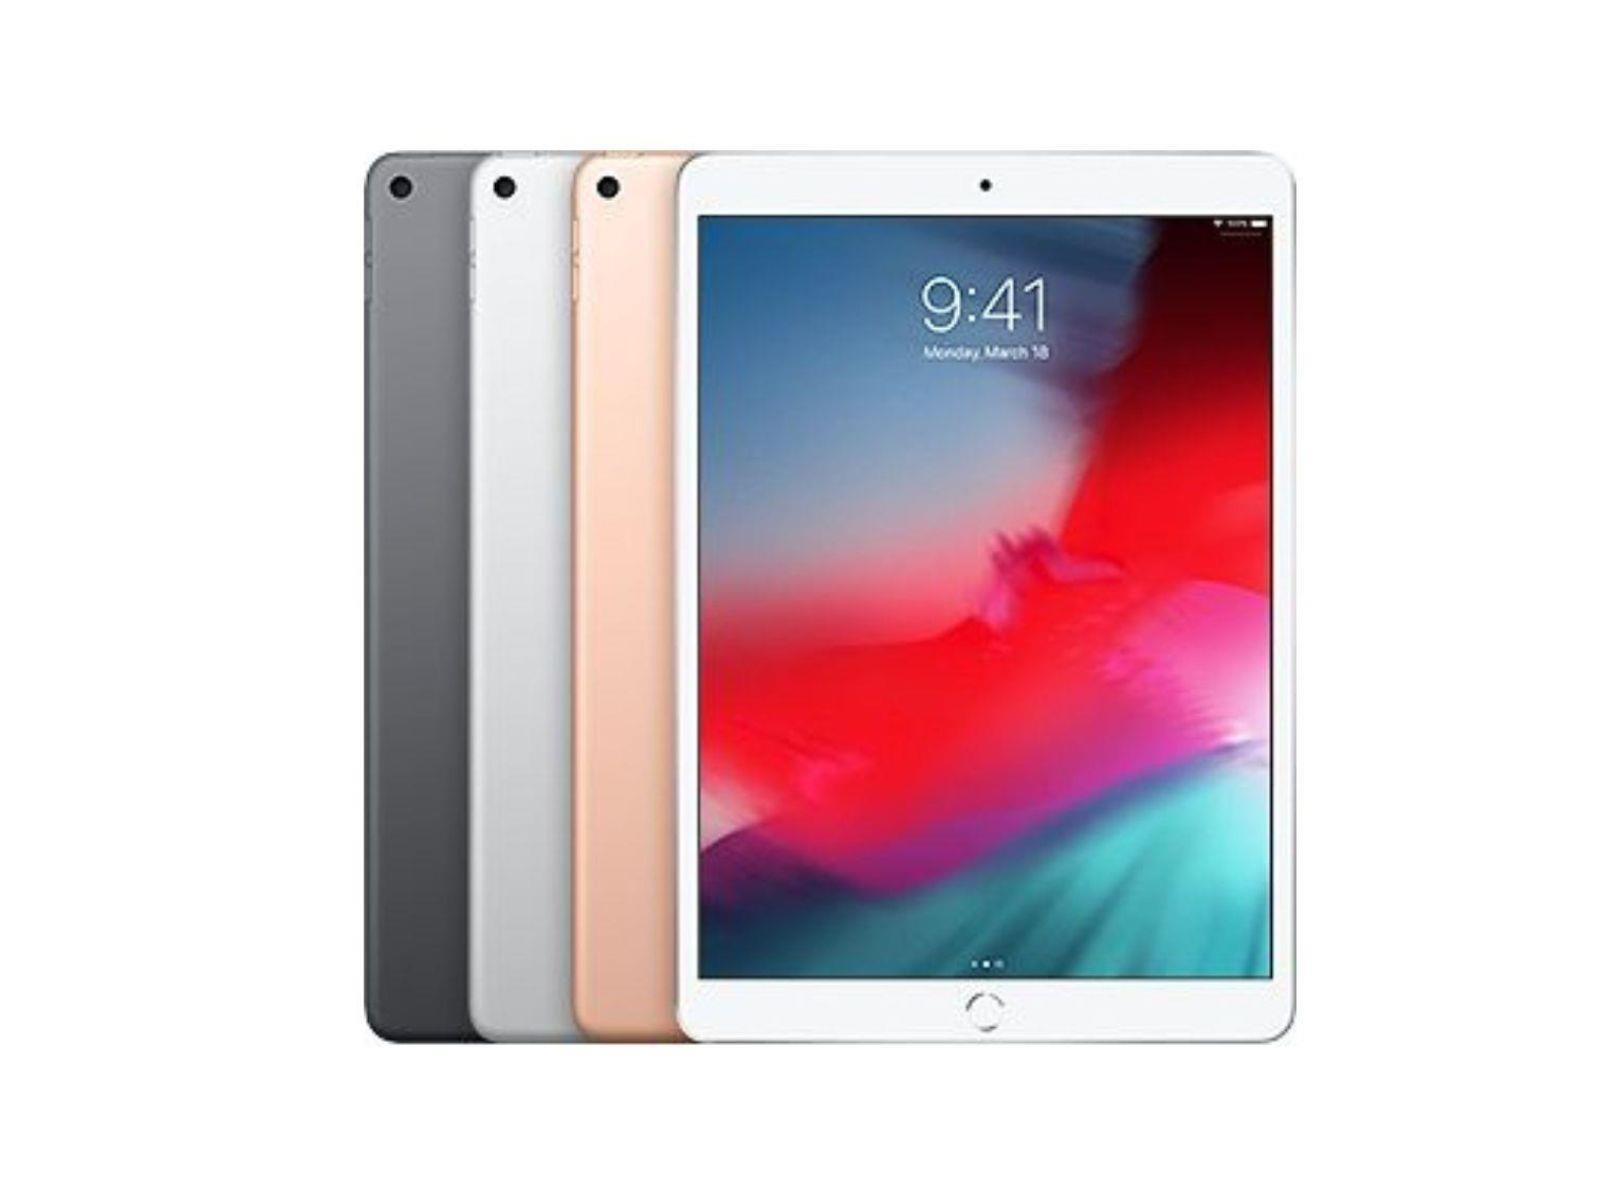 Image shows all colour options for the Apple iPad Air 3rd Generation